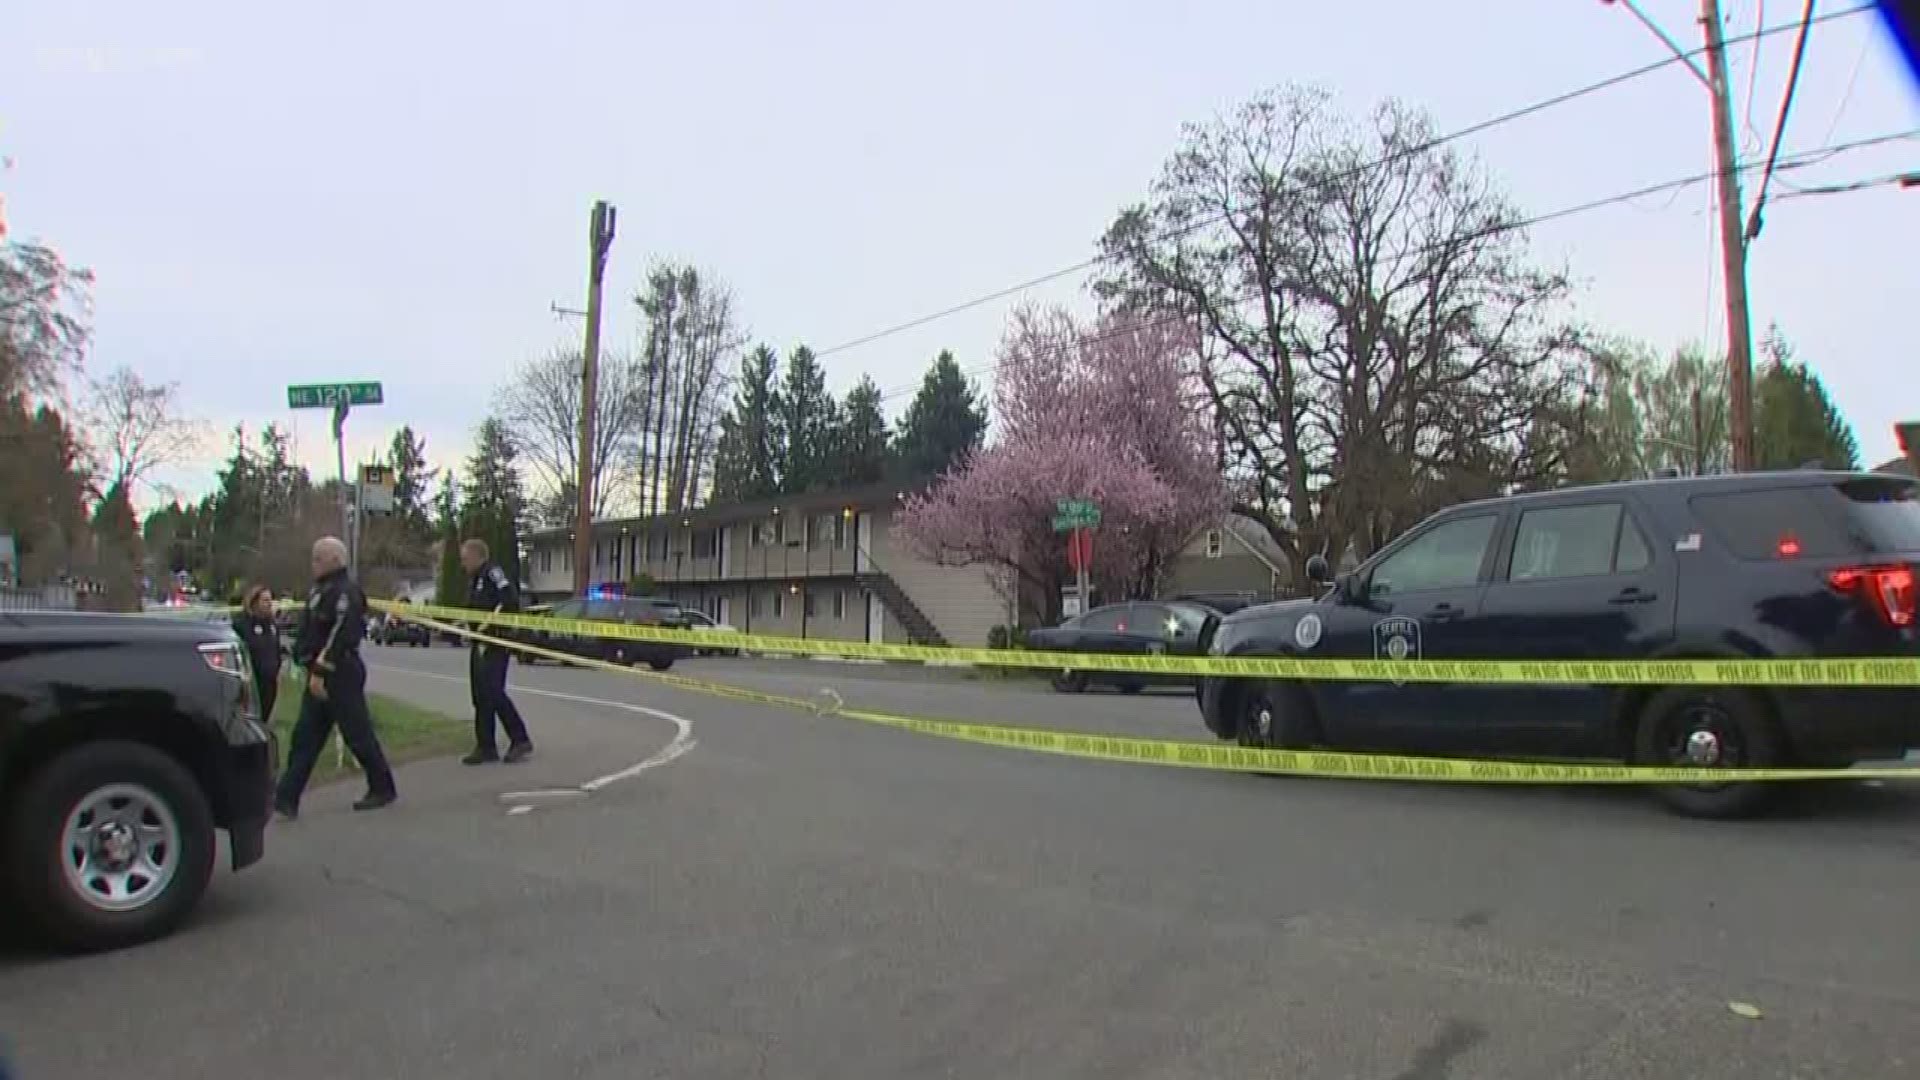 Tad Michael Norman, 33 has been charged in the North Seattle shooting rampage that left two people dead, two people wounded and several others in the line of fire.